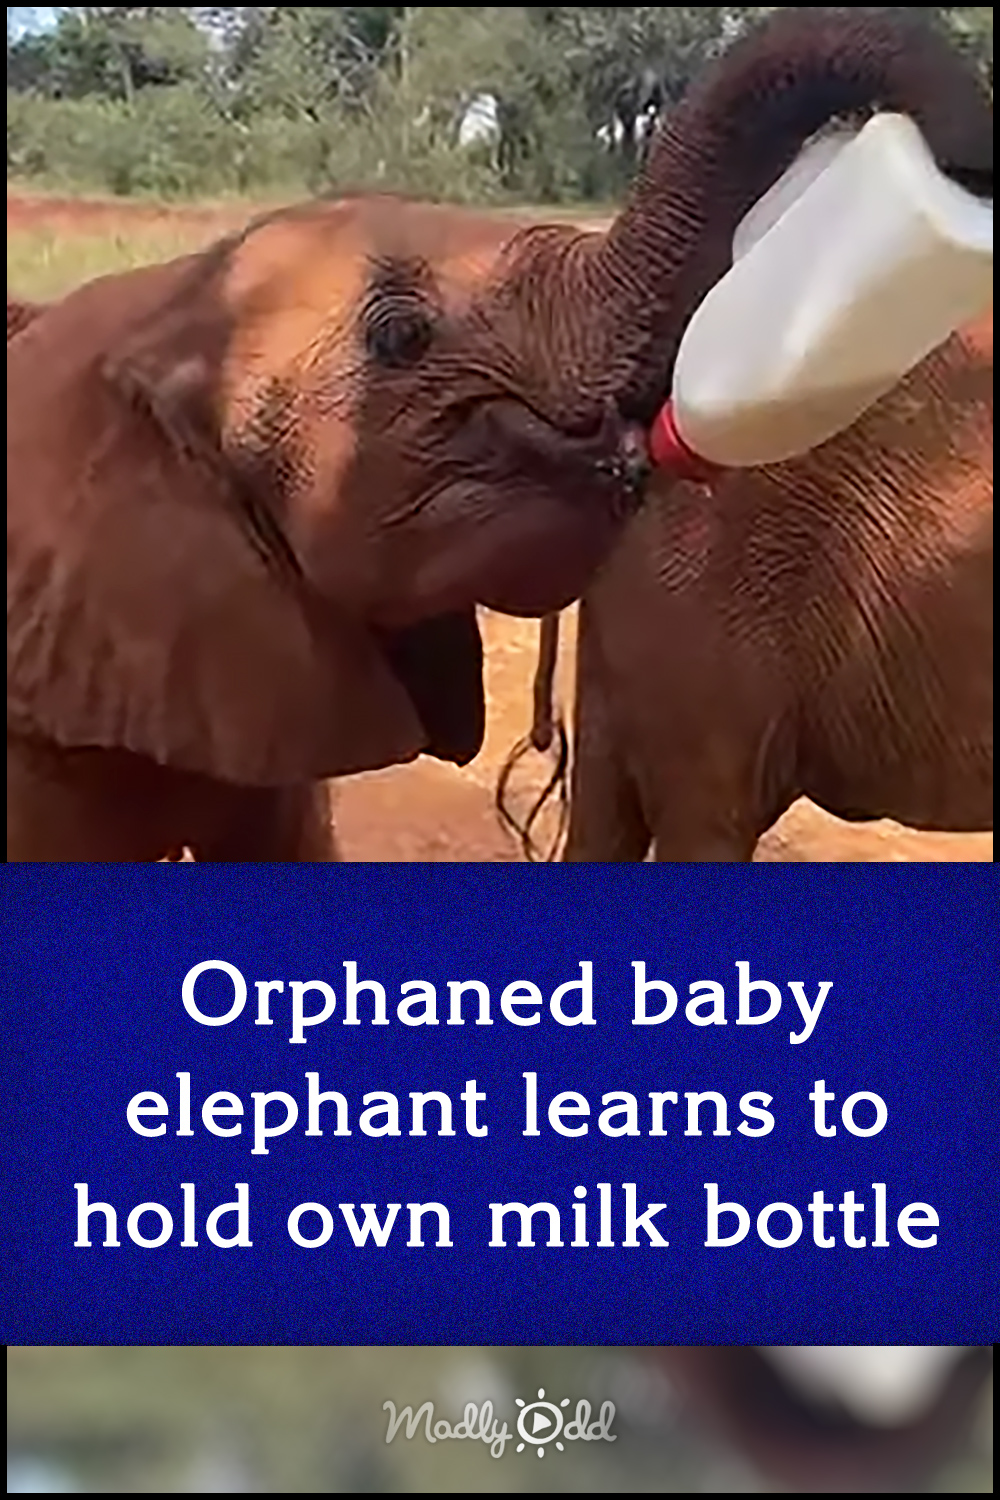 Orphaned baby elephant learns to hold own milk bottle